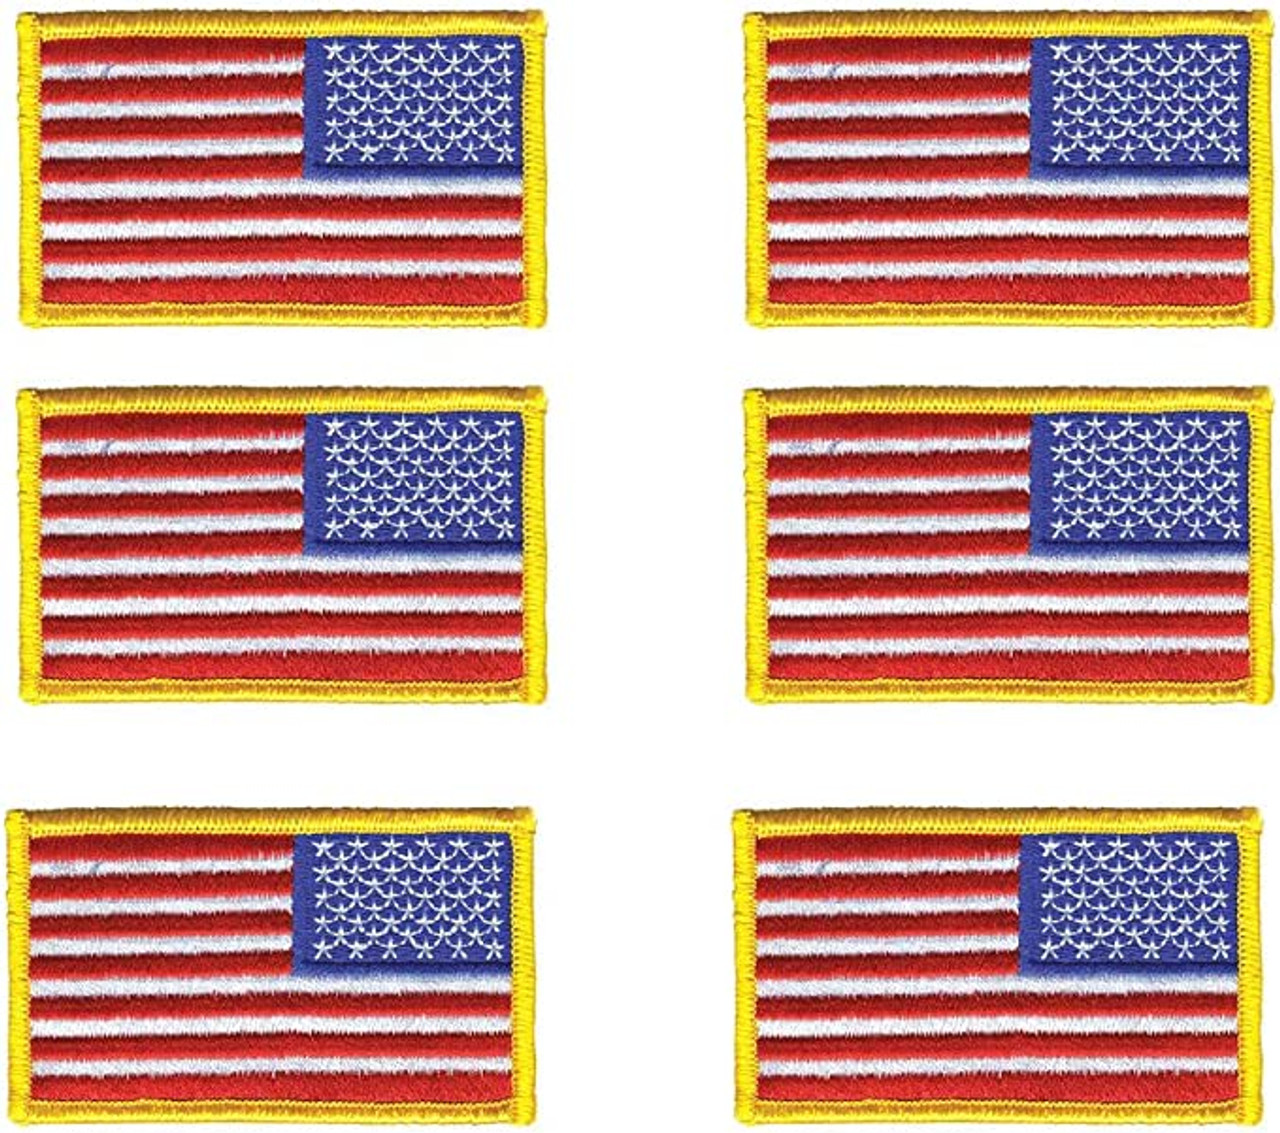 6 Pack Reversed American Flag Embroidered Patch Gold Border USA - US Army Flag Patch - Sew on